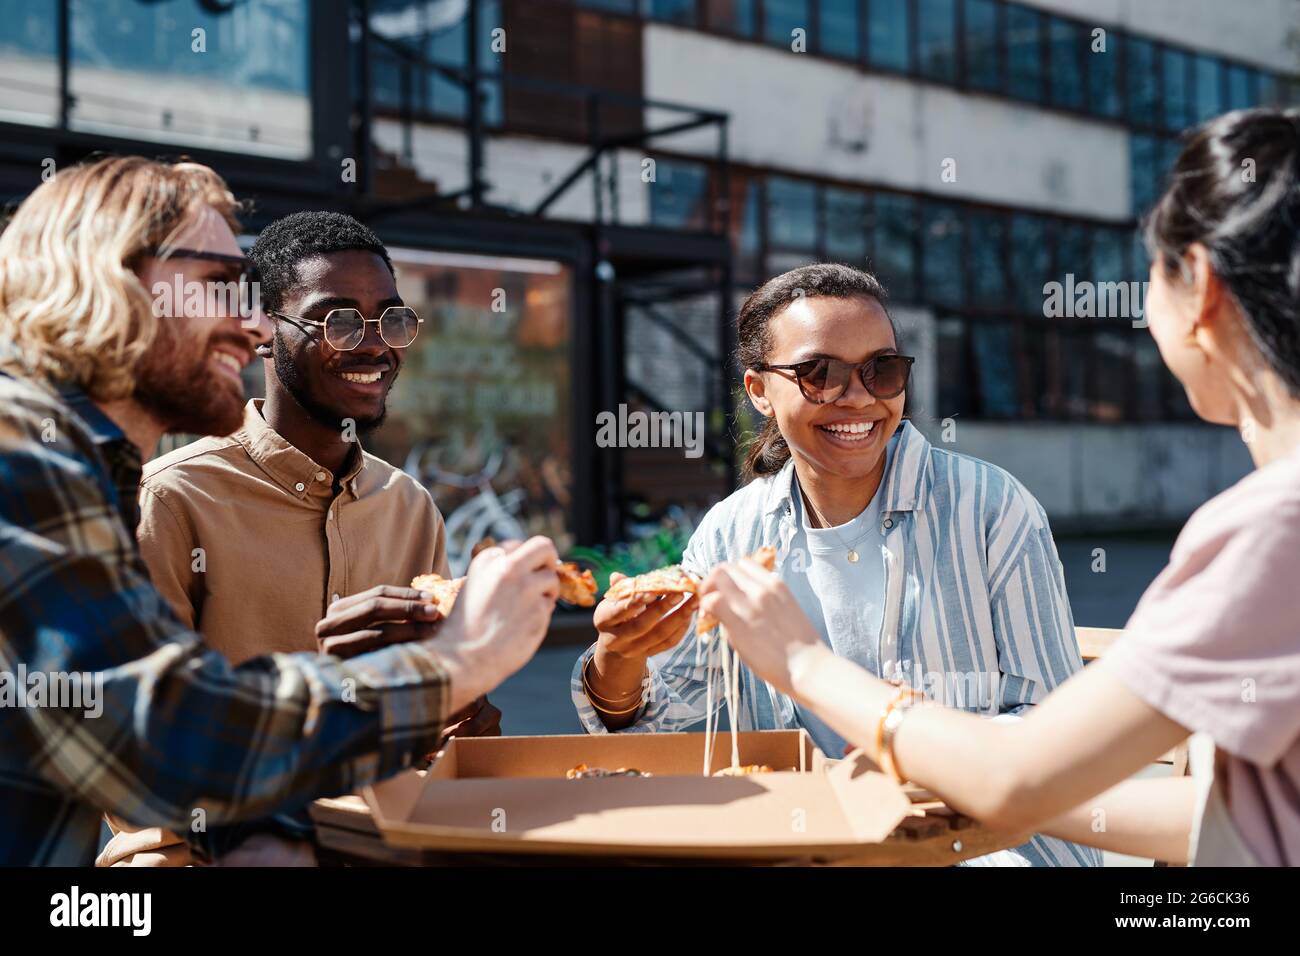 Diverse group of contemporary young people enjoying pizza outdoors, scene lit by sunlight, copy space Stock Photo